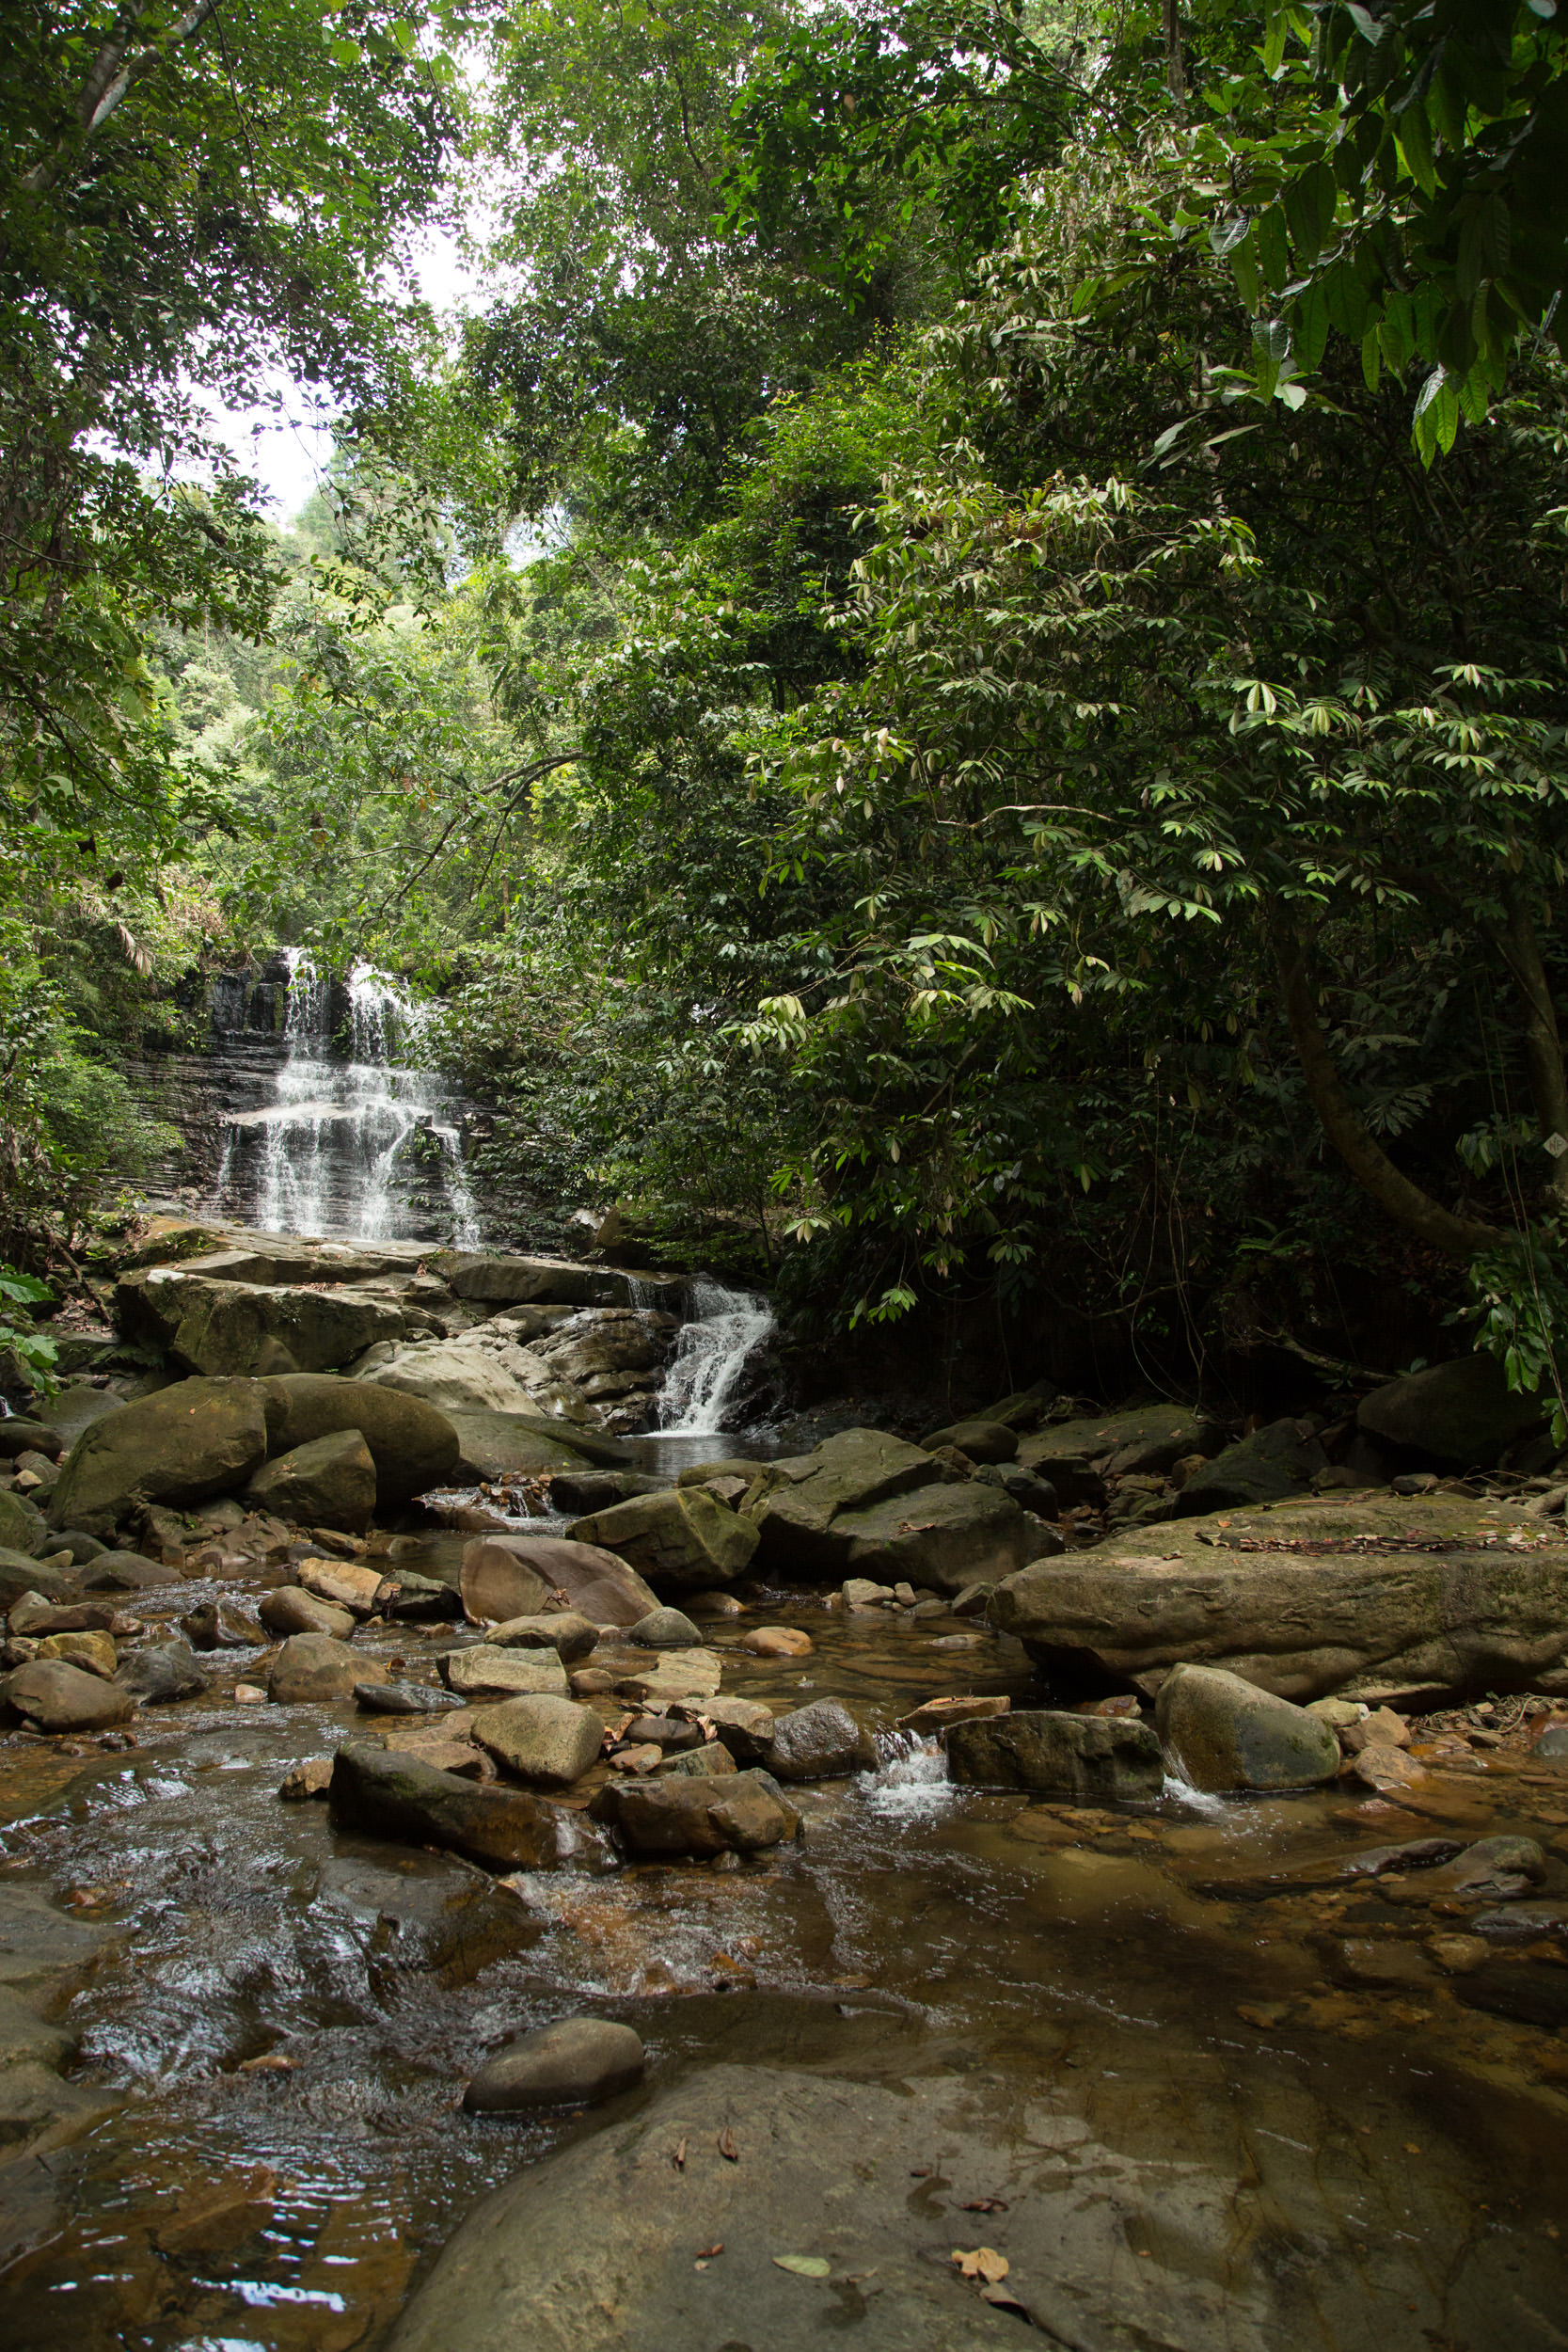  All forrests need water, and borneo is no exception, with lots of rivers and waterfalls deep in the jungle 